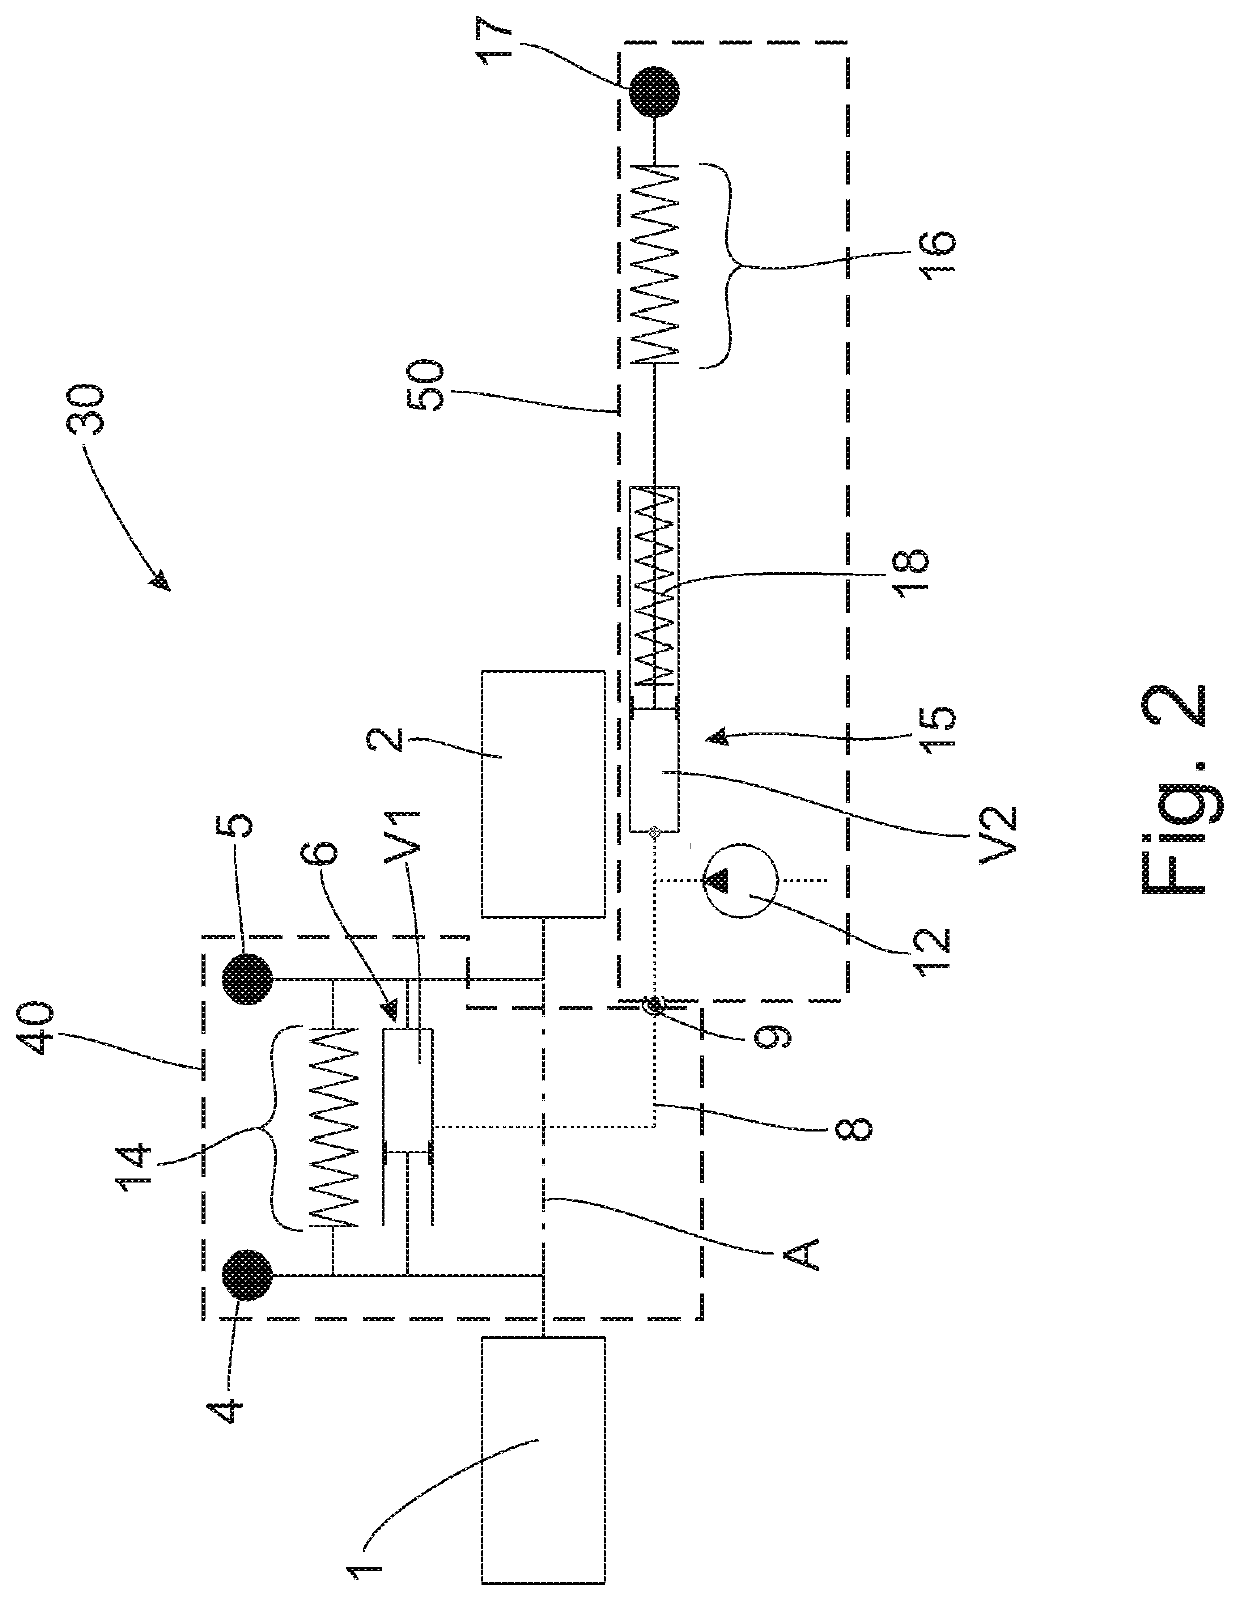 Torsional vibration damping assembly for a drive train of a vehicle